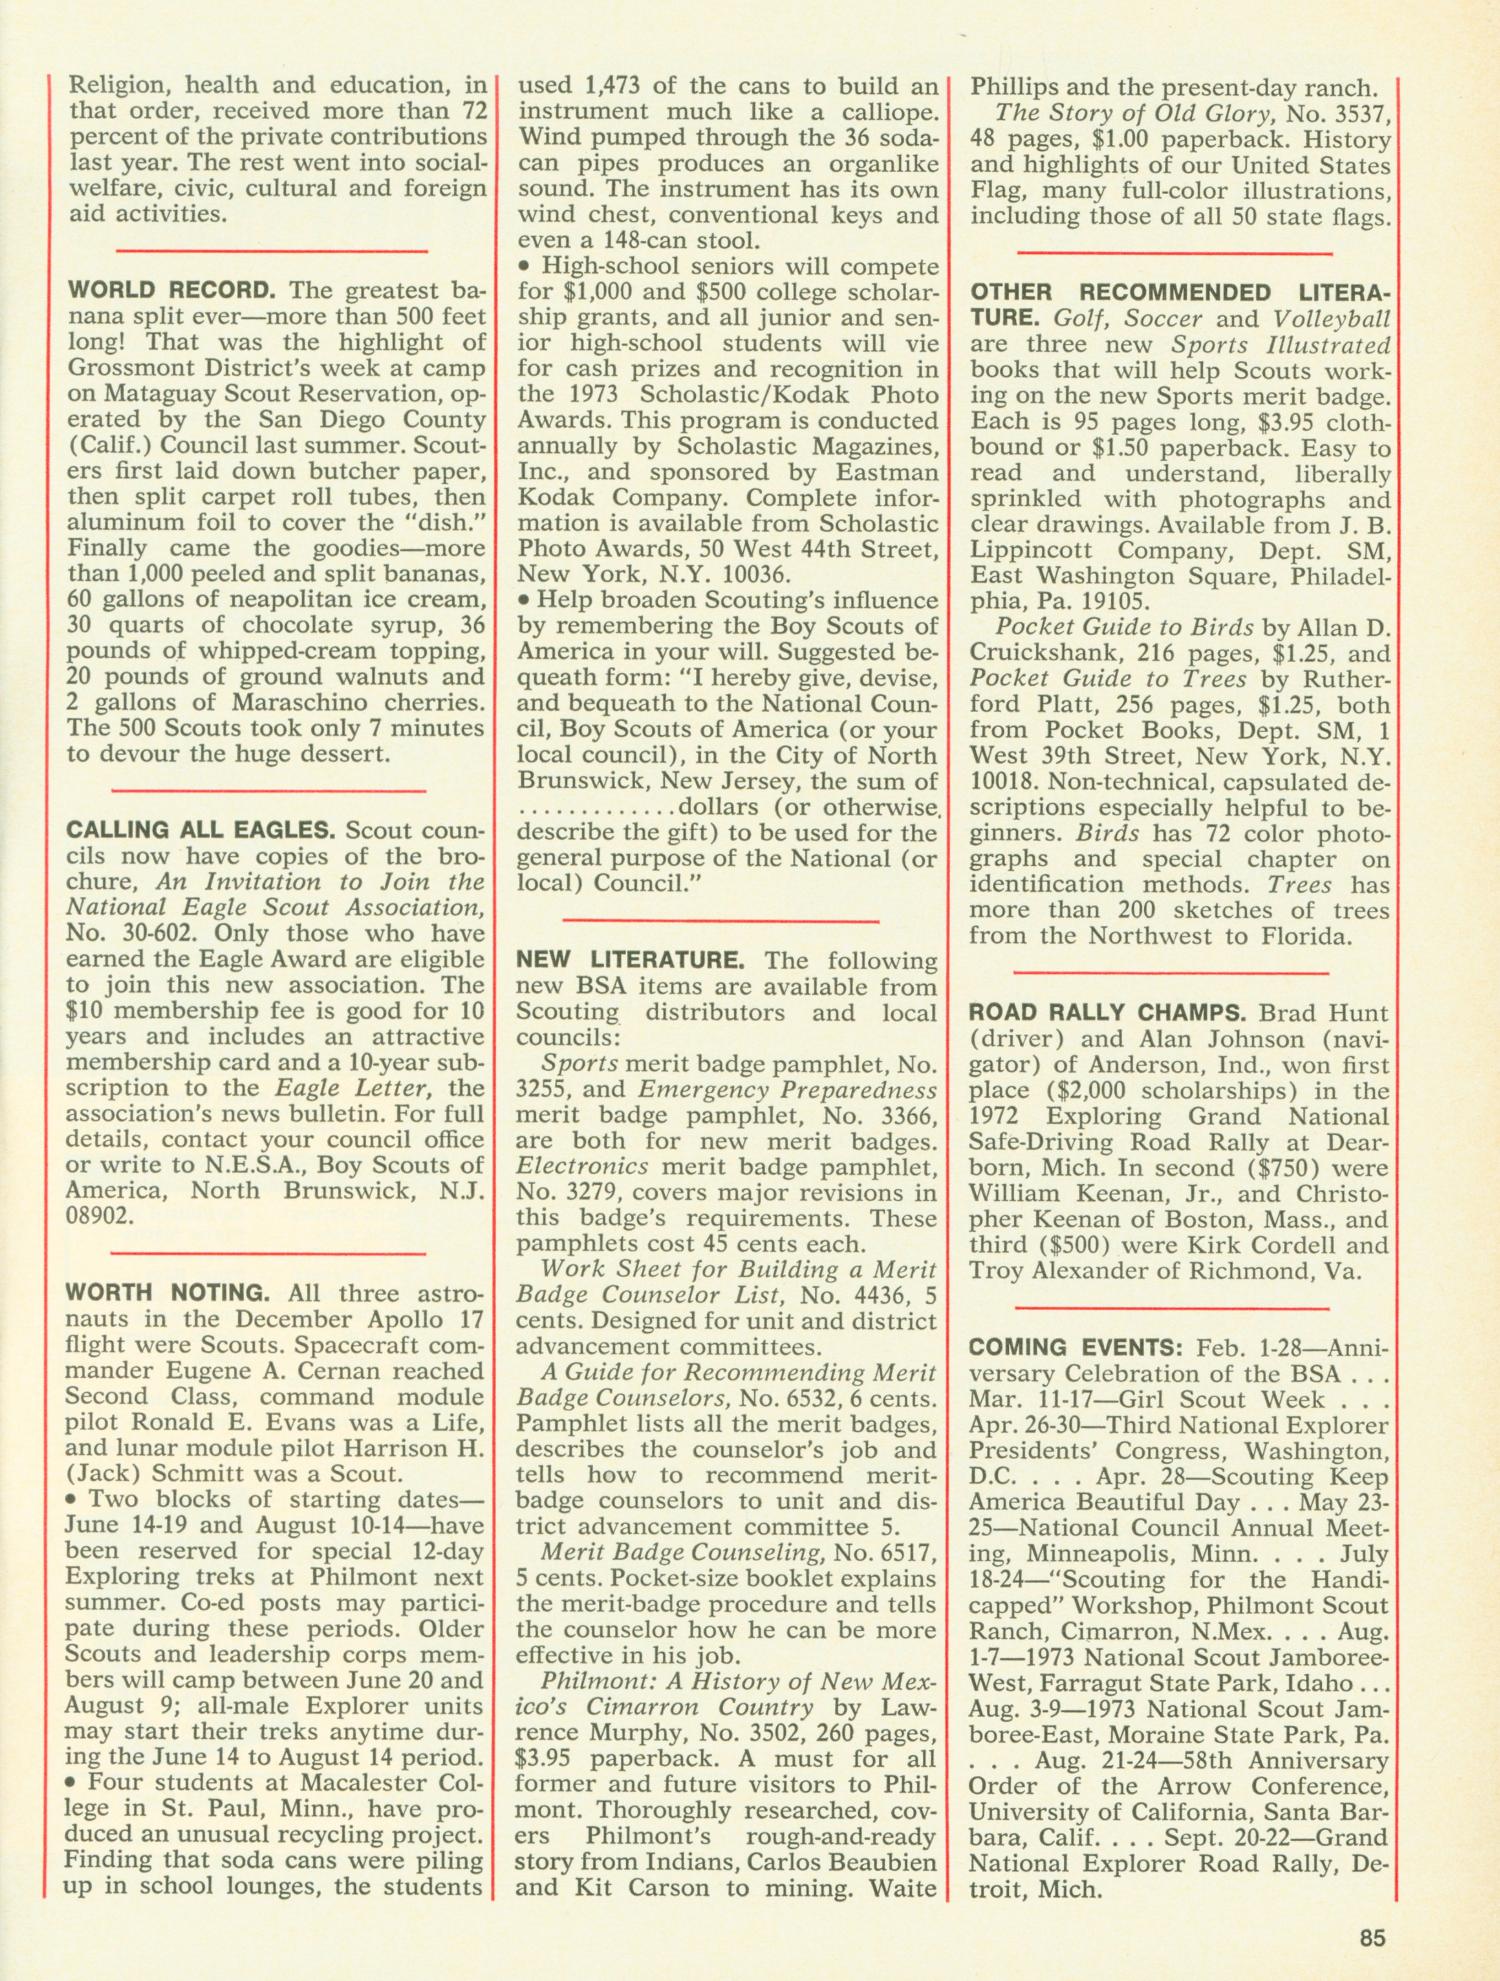 Scouting, Volume 61, Number 1, January-February 1973
                                                
                                                    85
                                                